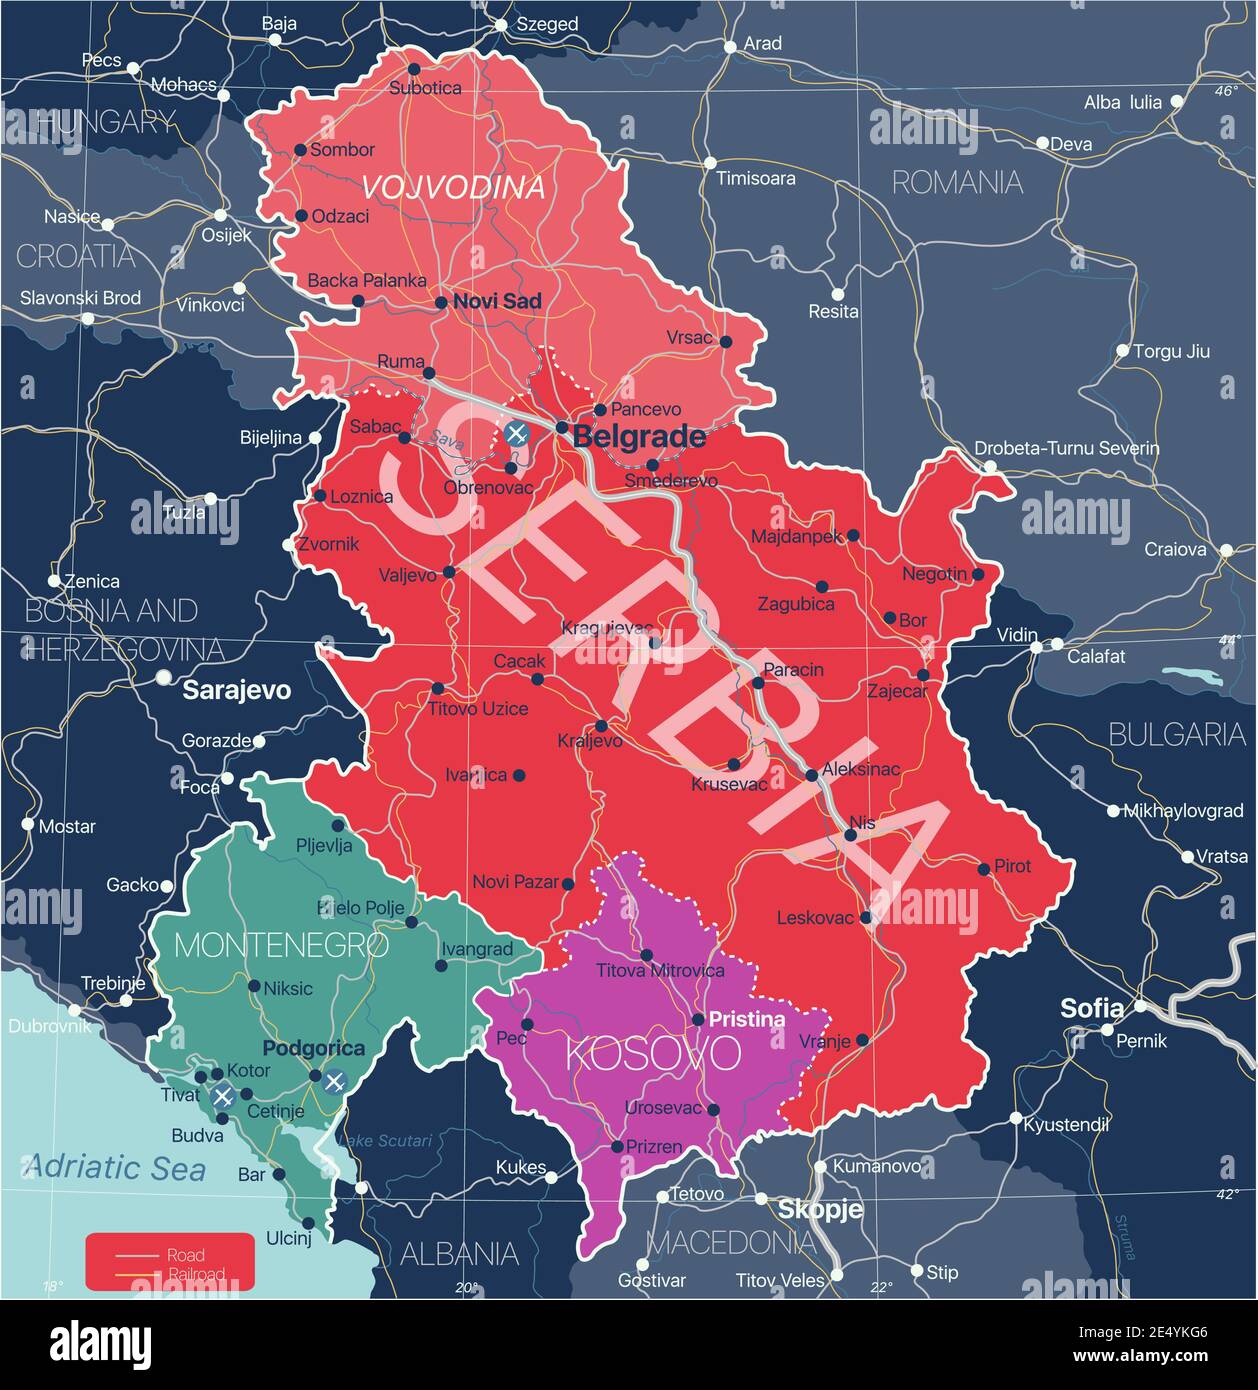 Serbia Kosovo And Montenegro Countries Detailed Editable Map With